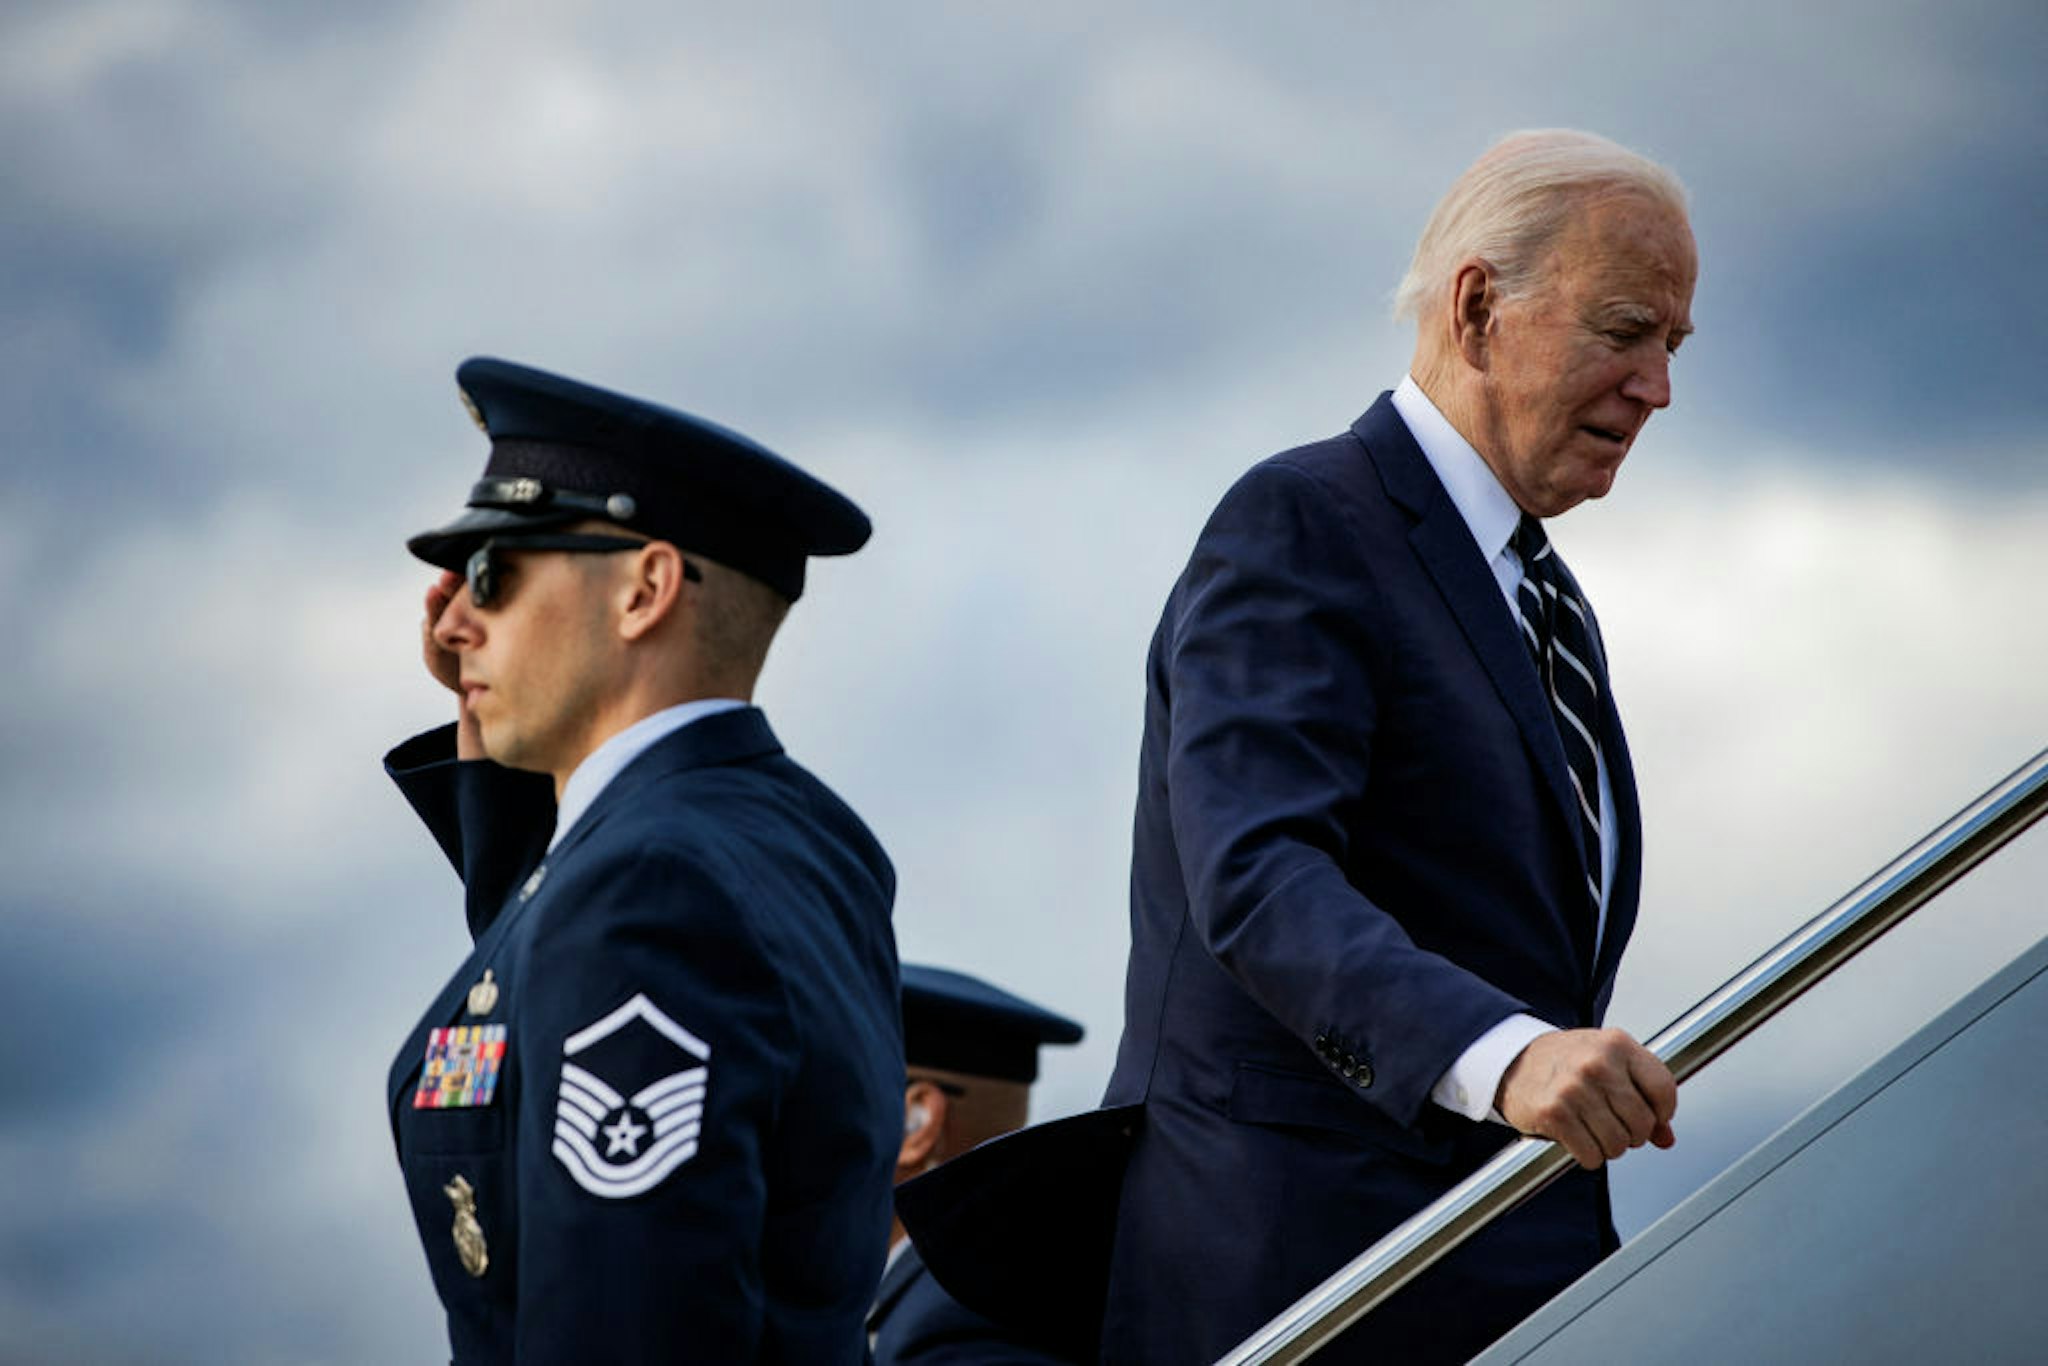 US President Joe Biden boards Air Force One at Joint Base Andrews in Maryland on April 12, 2024 as he departs for Rehoboth, Delaware, where he will spend the weekend. (Photo by SAMUEL CORUM / AFP)